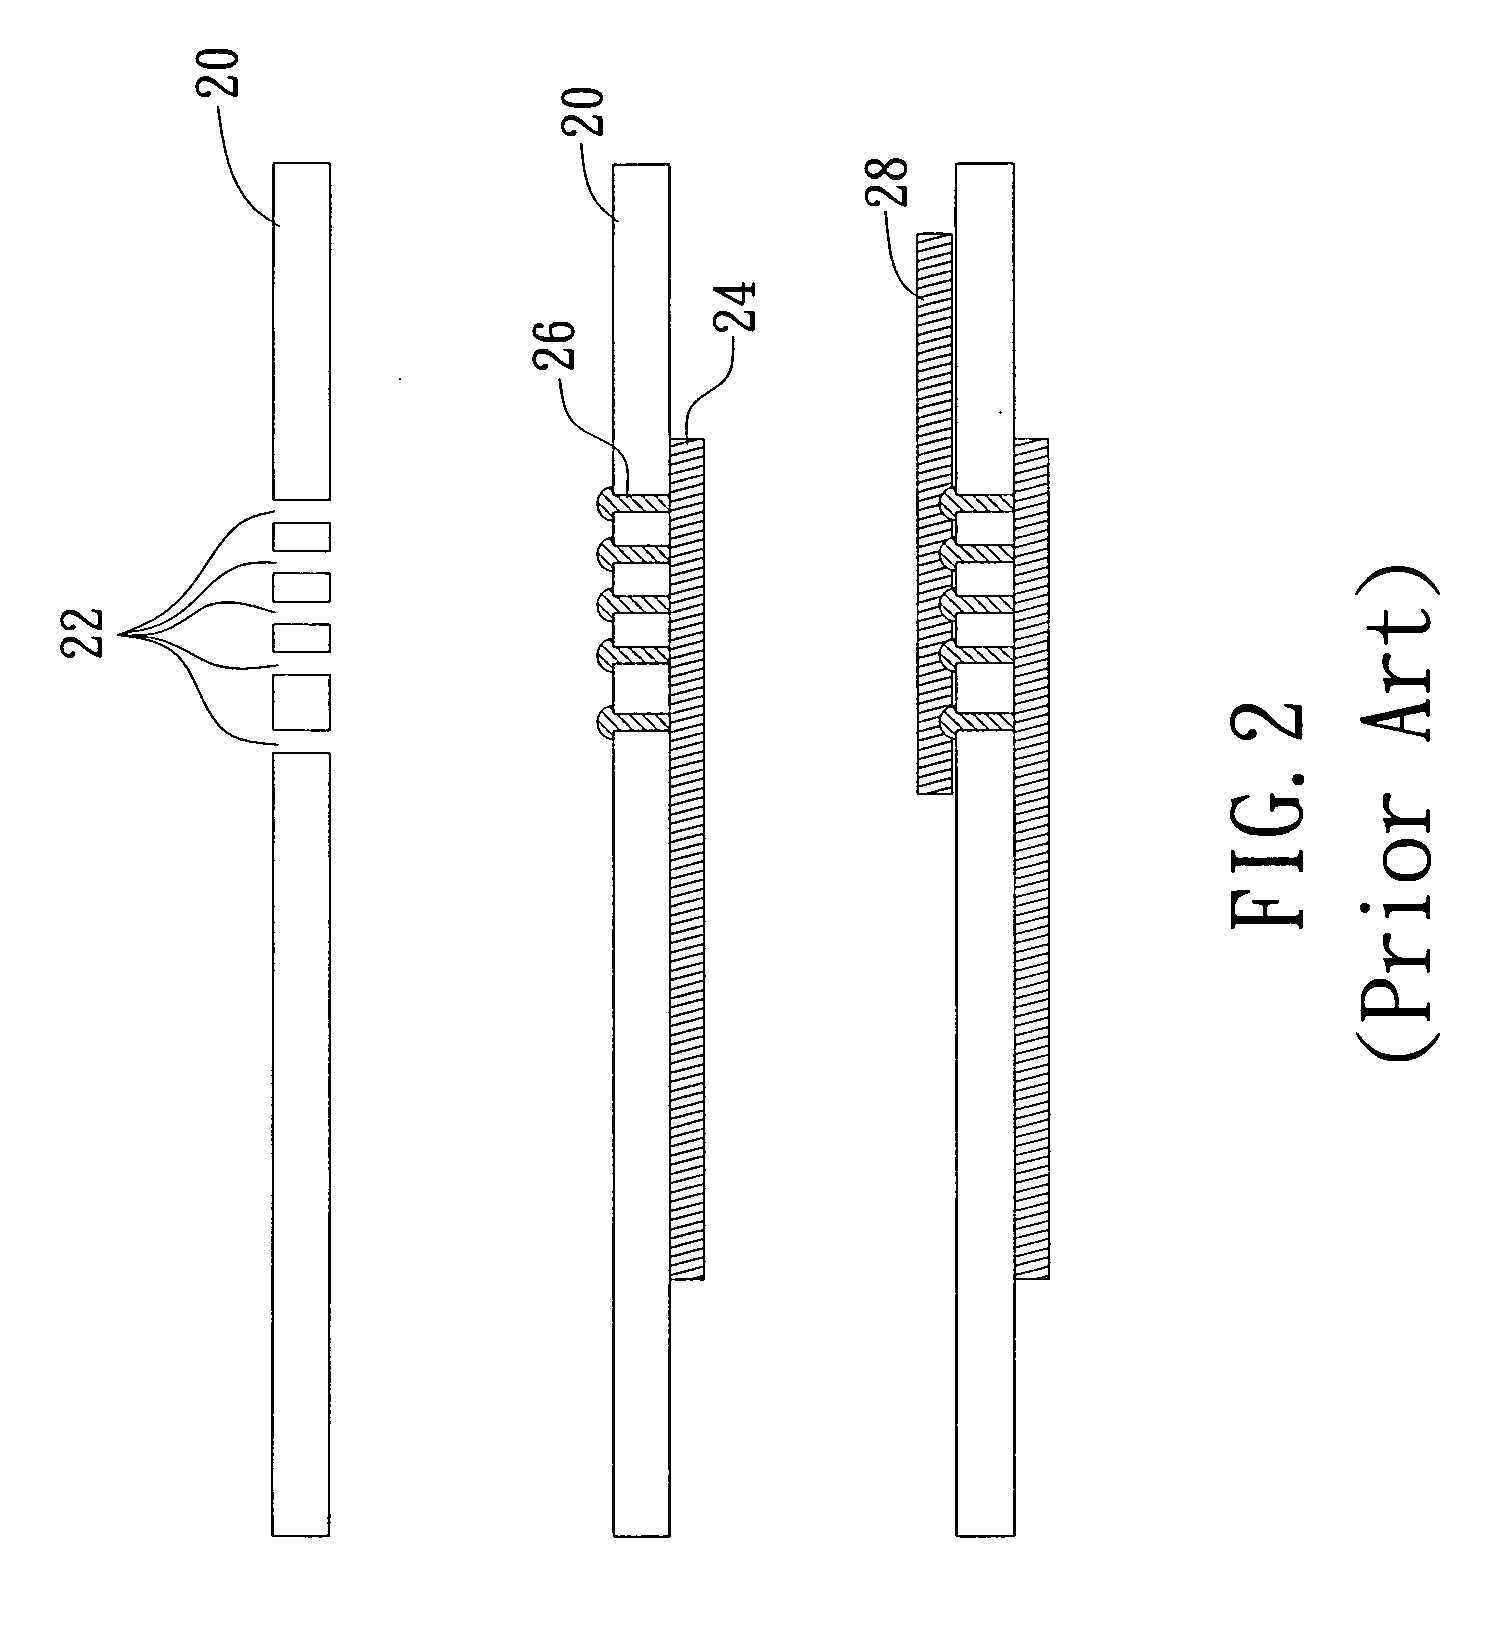 Flexible biomonitor with EMI shielding and module expansion